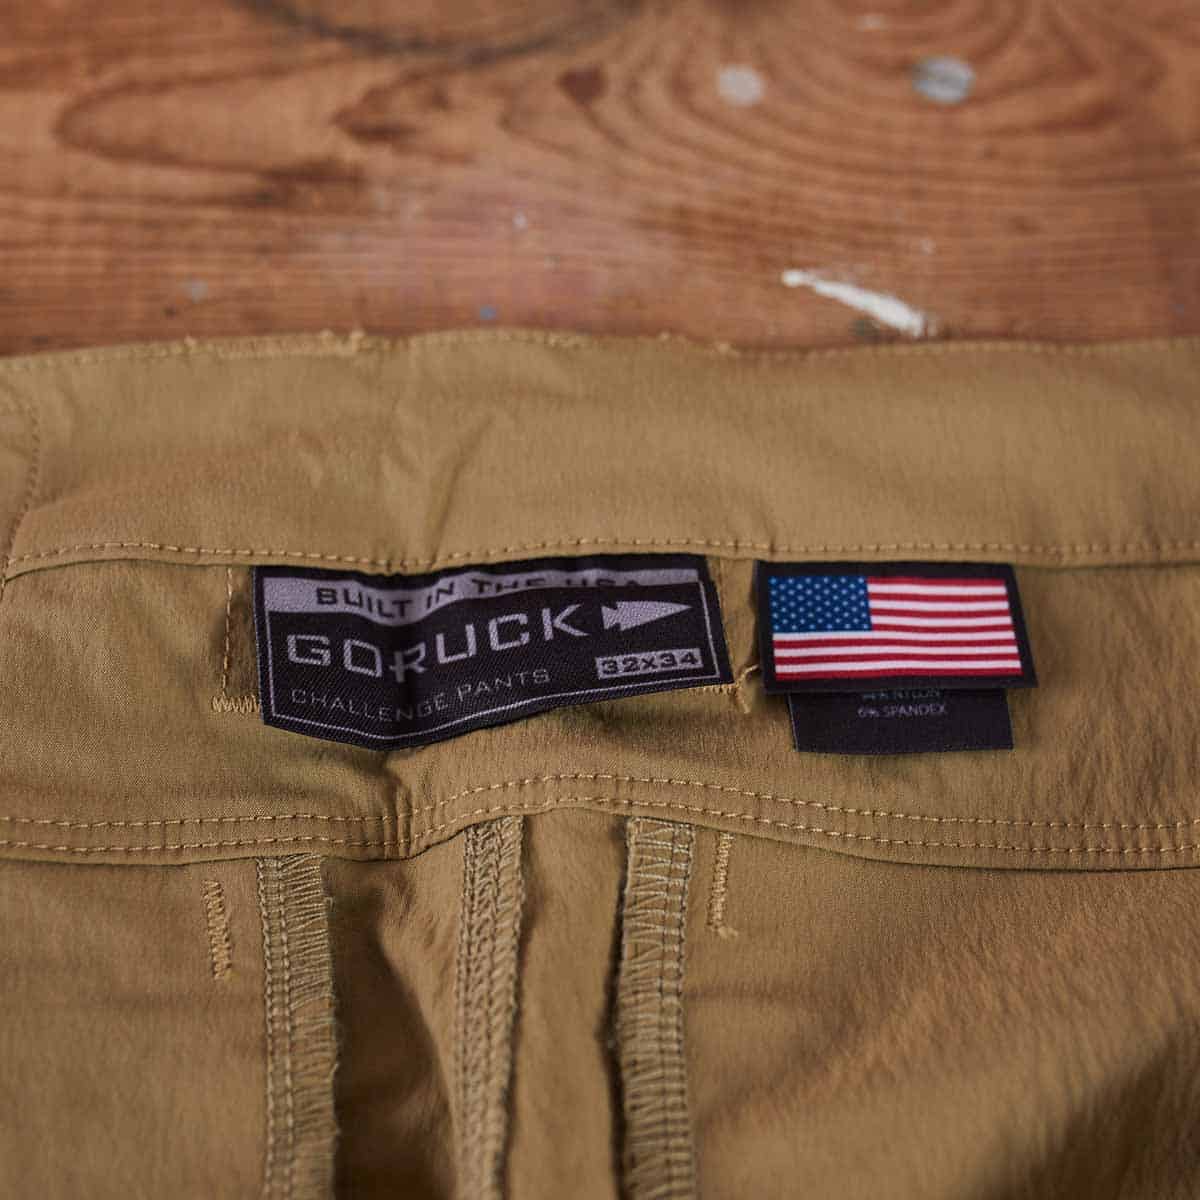 GORUCK Challenge Pants Review - Fit at Midlife